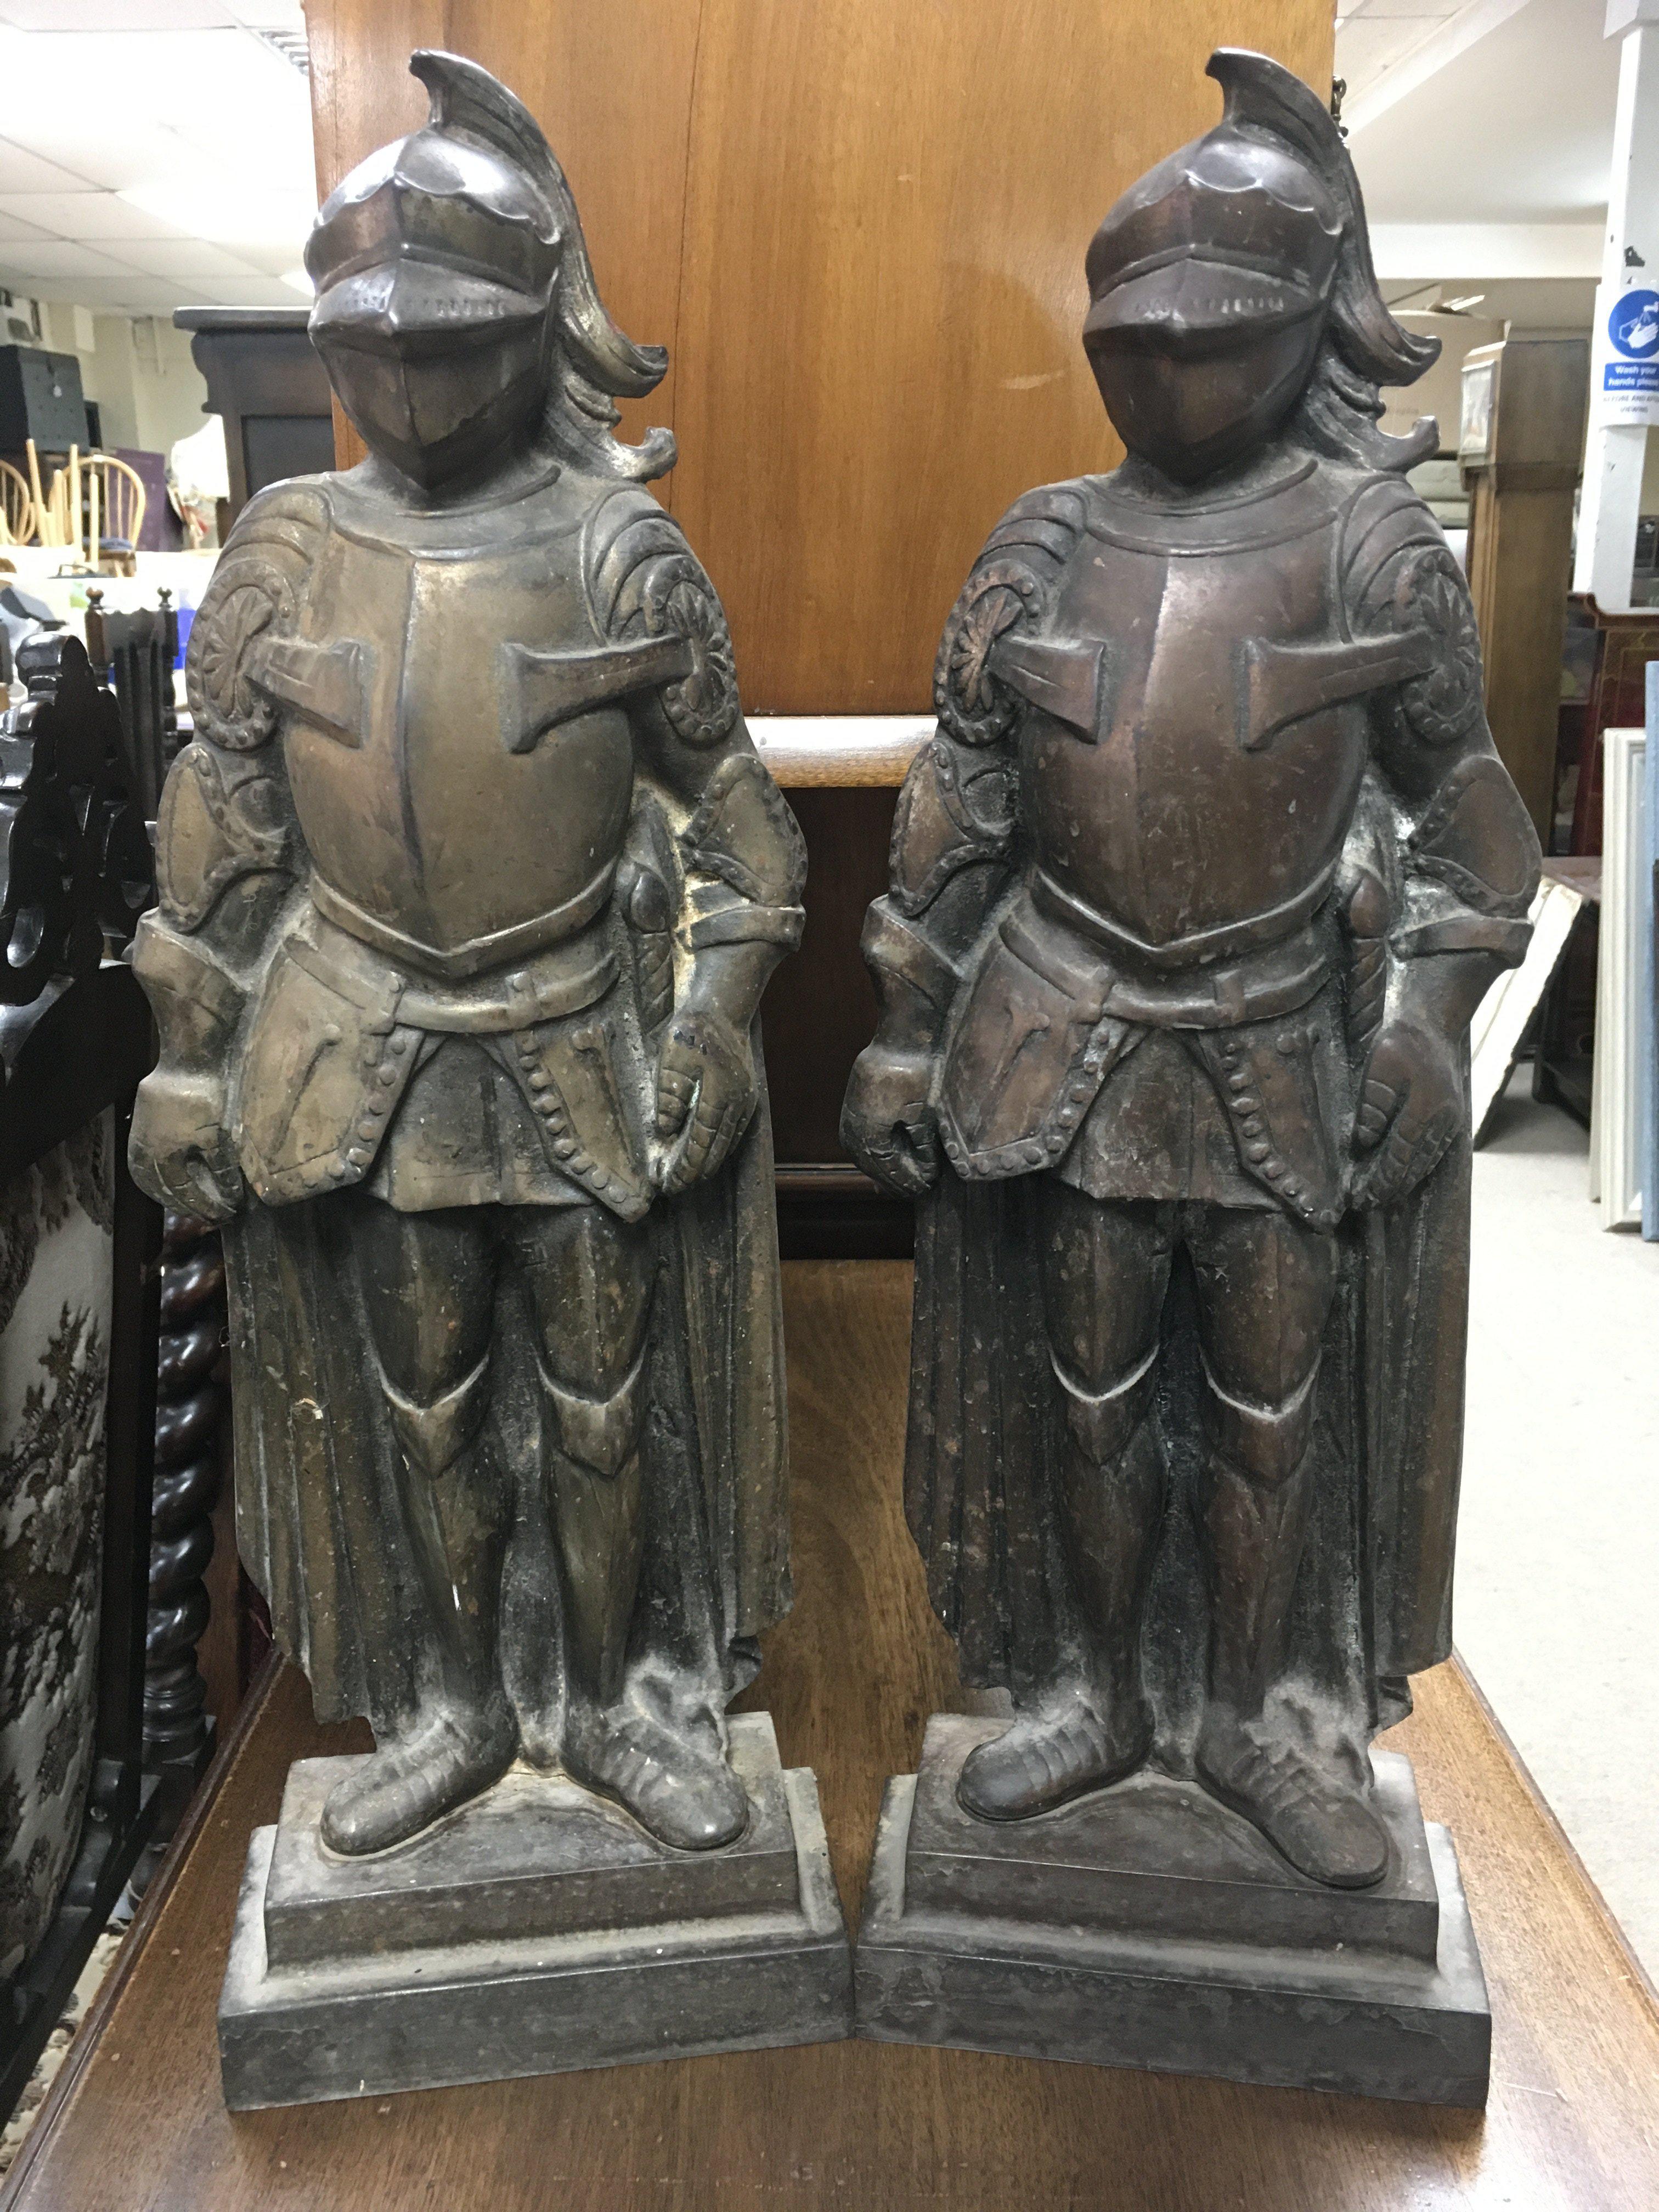 Pre cast iron figures of knights, suitable for fir